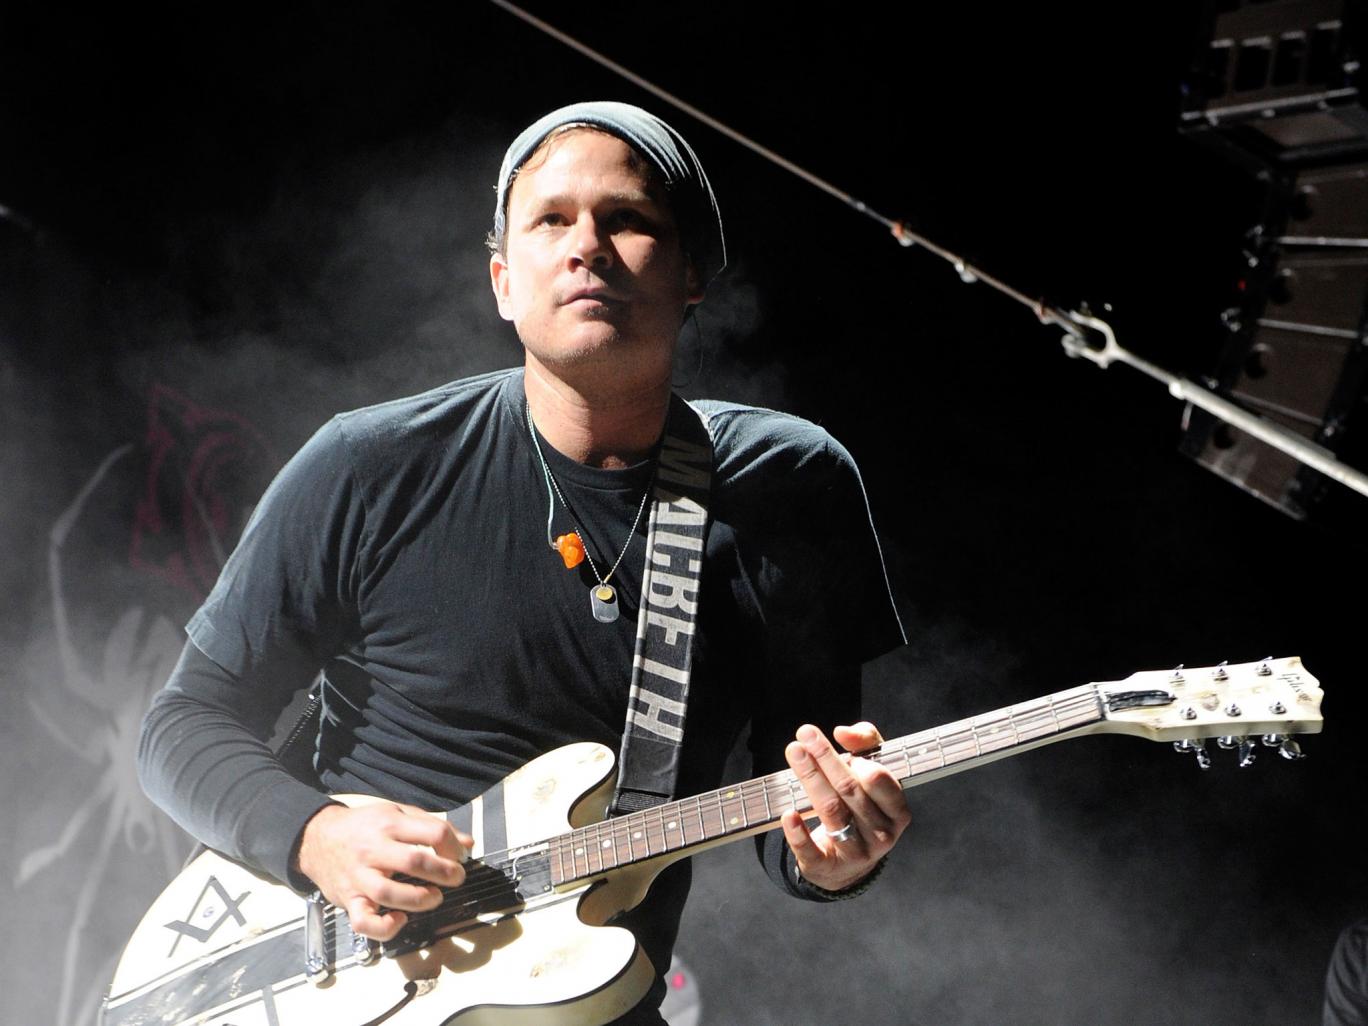 Is Tom Delonge About to Reveal an Alien Conspiracy?